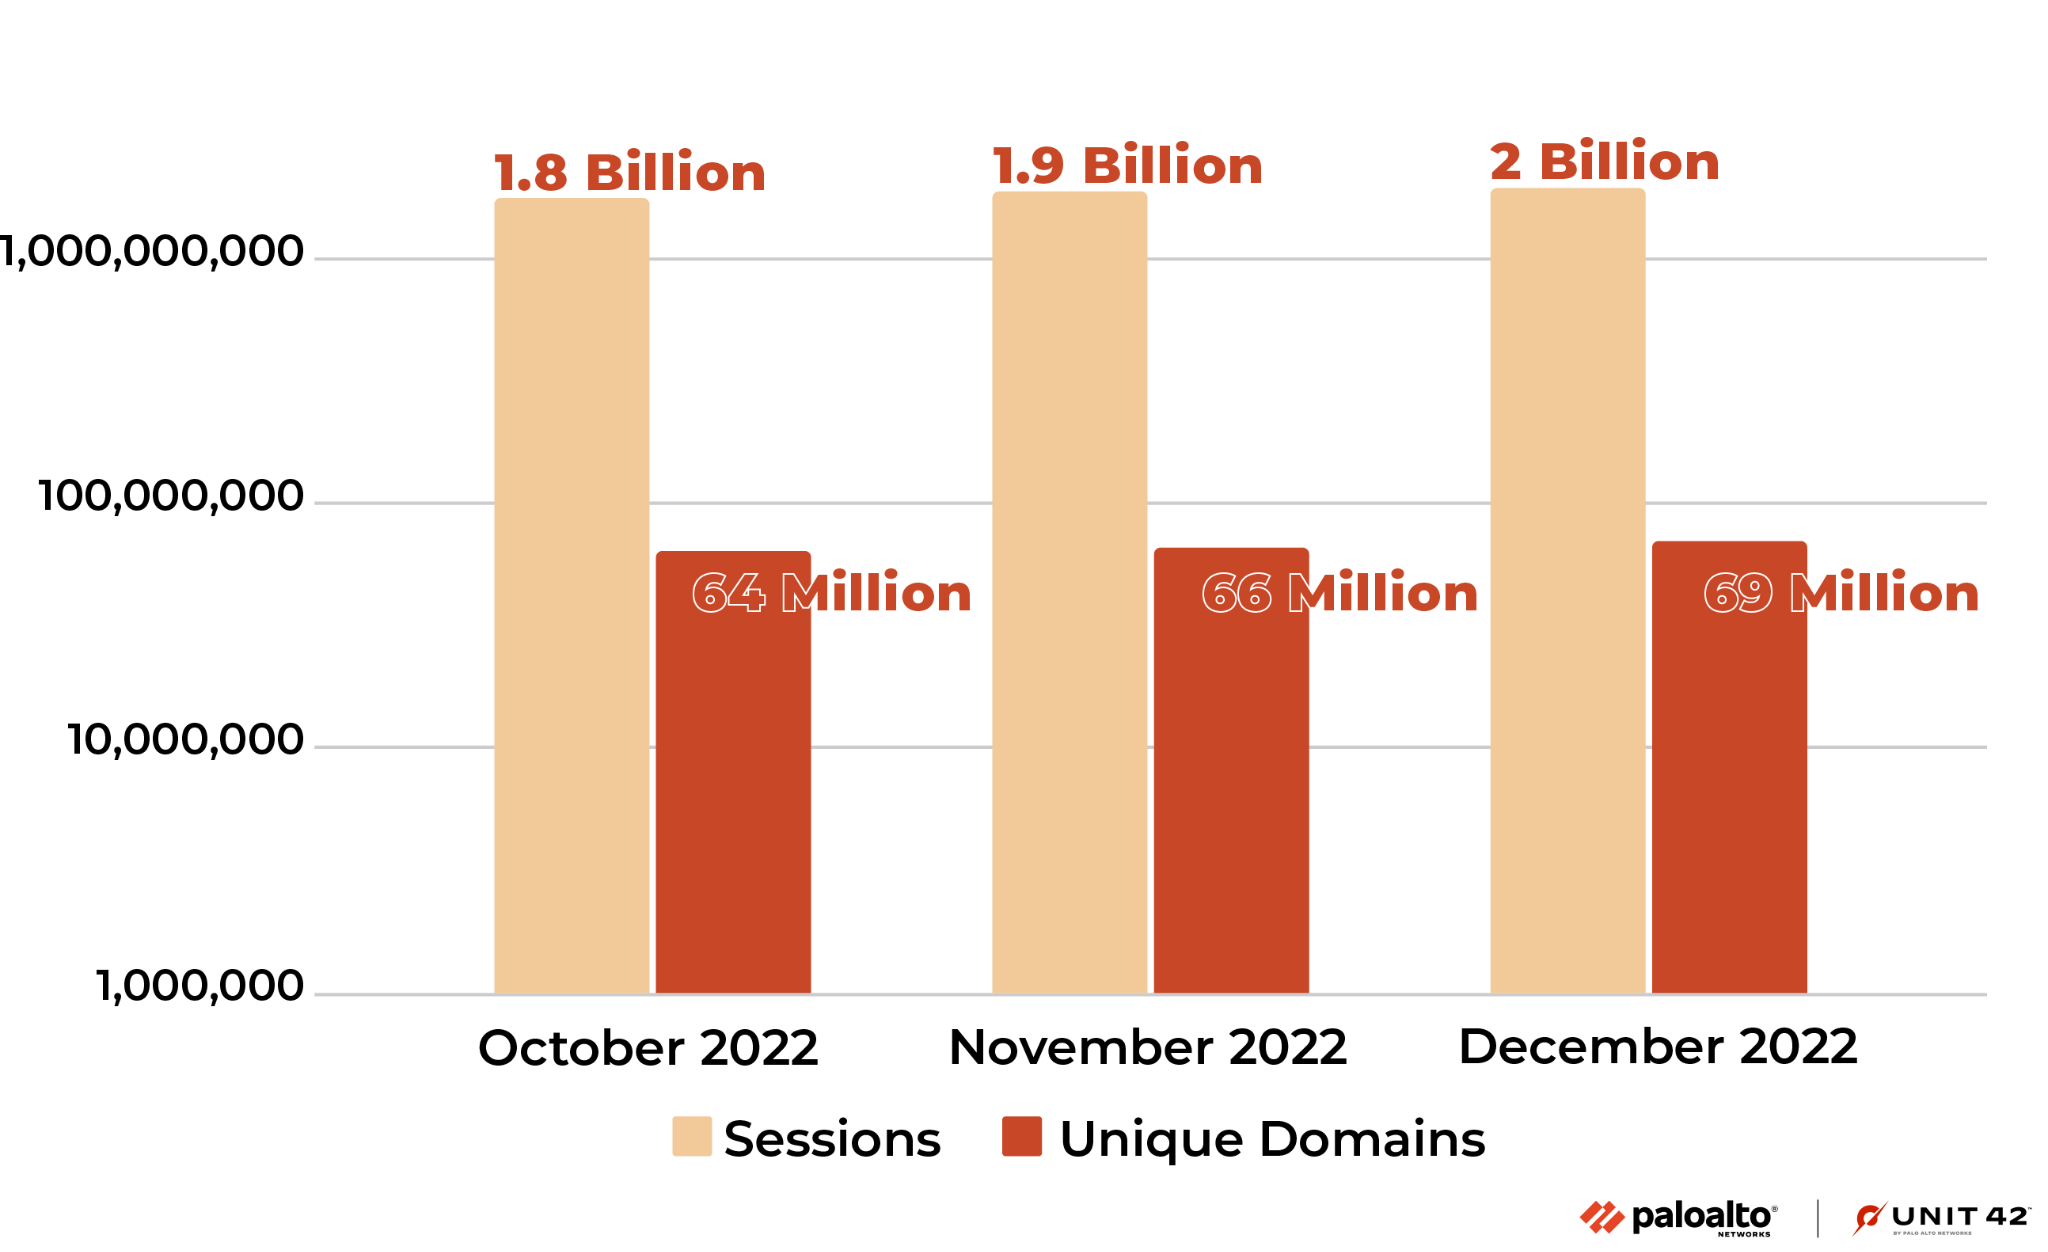 Image 8 is a column chart comparing malicious DNS sessions from October through December 2022. Sessions are the largest amount, in the billions for each month, compared to the unique domains, which are only in the tens of millions each month.